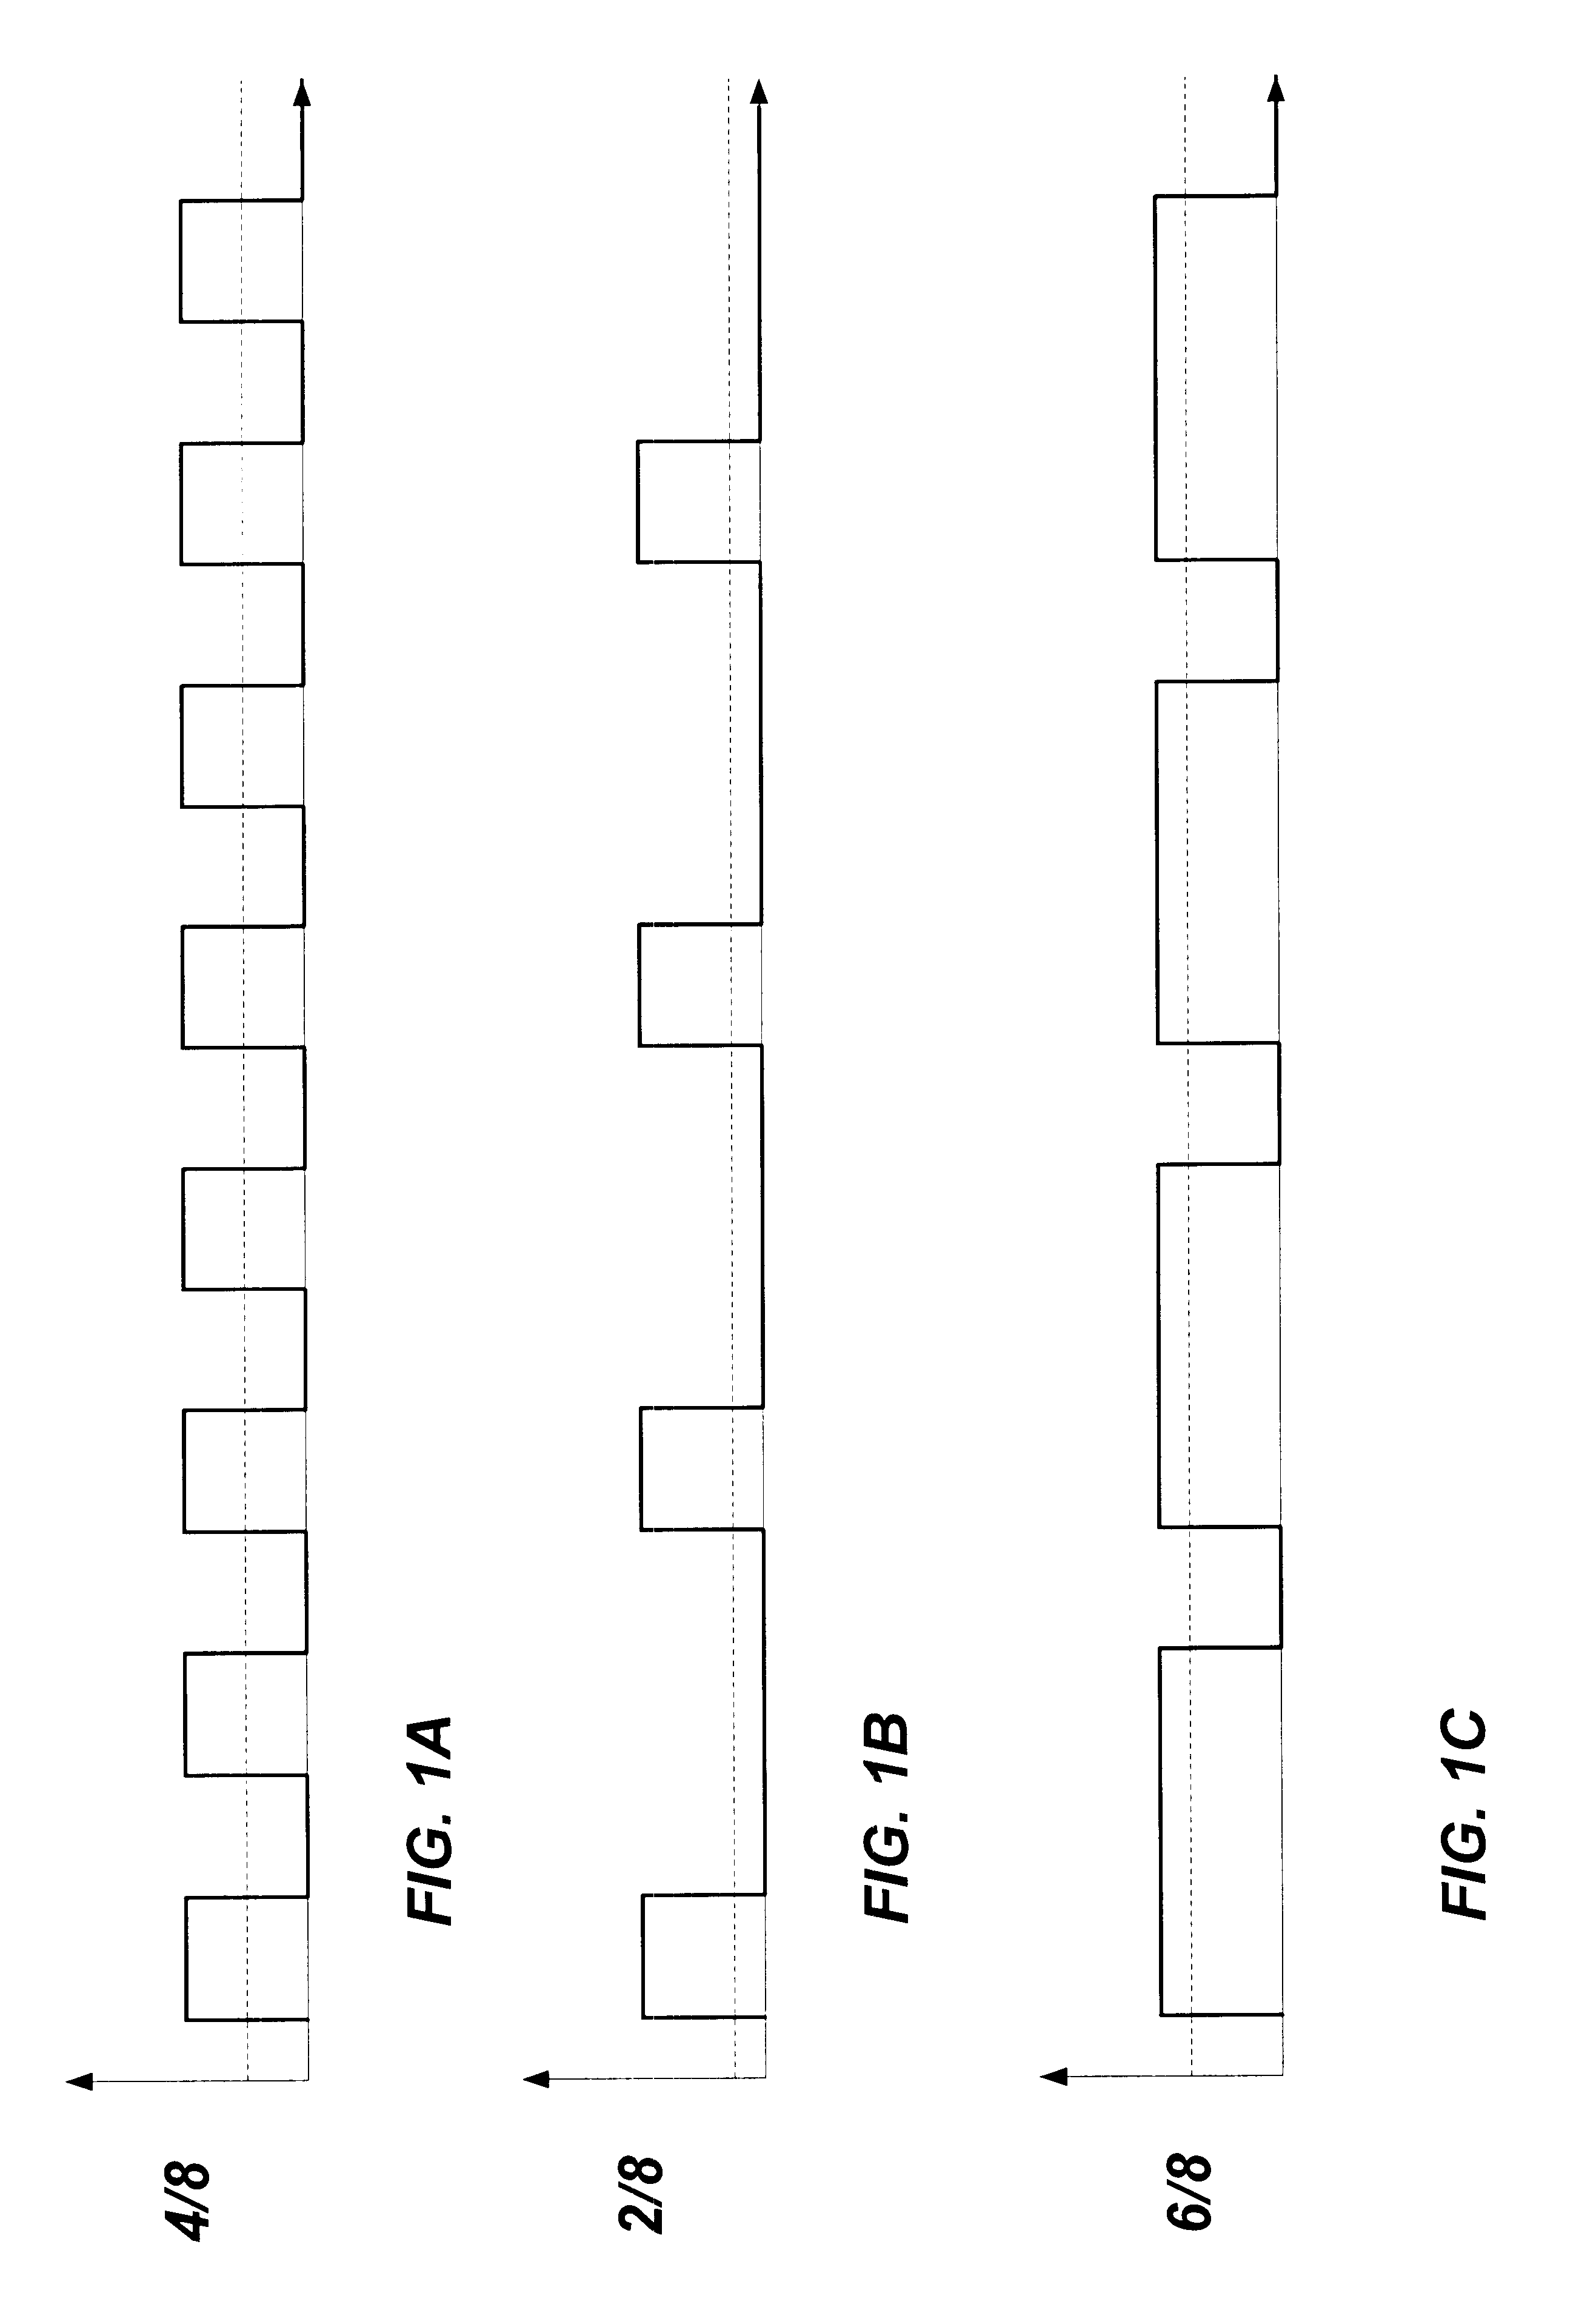 Repetitive pattern testing circuit for AC-coupled systems